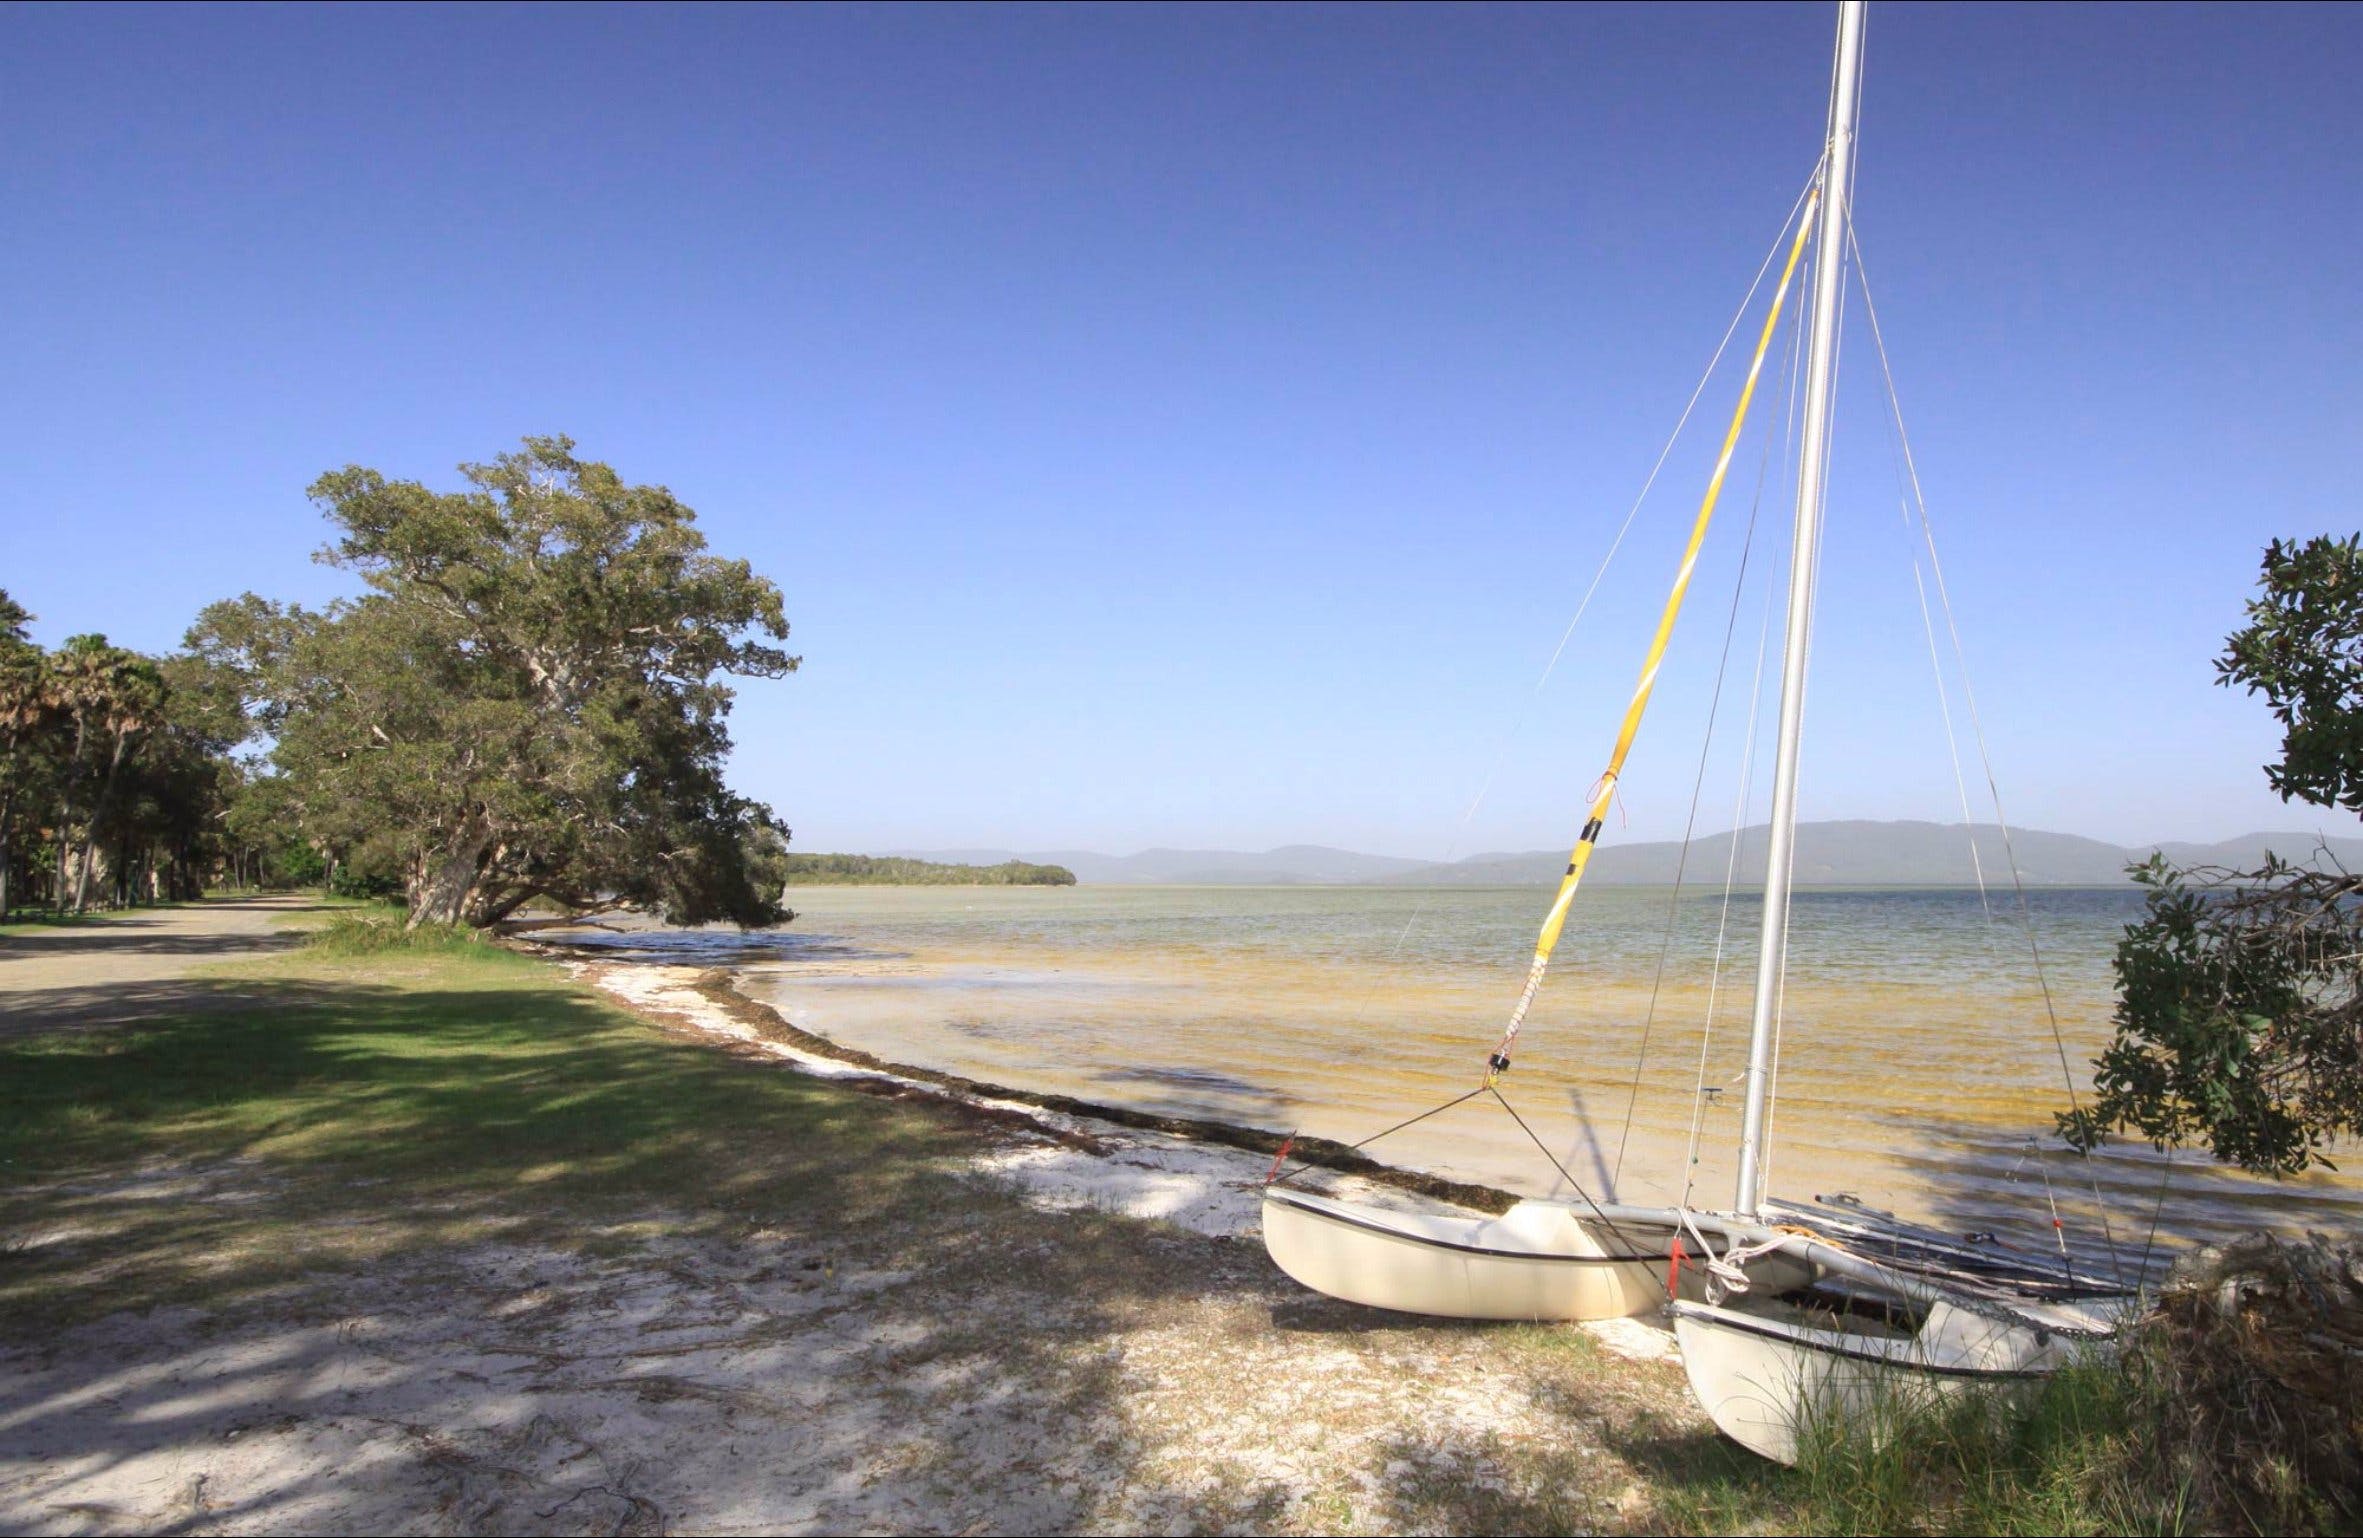 Sailing Club picnic area - Find Attractions